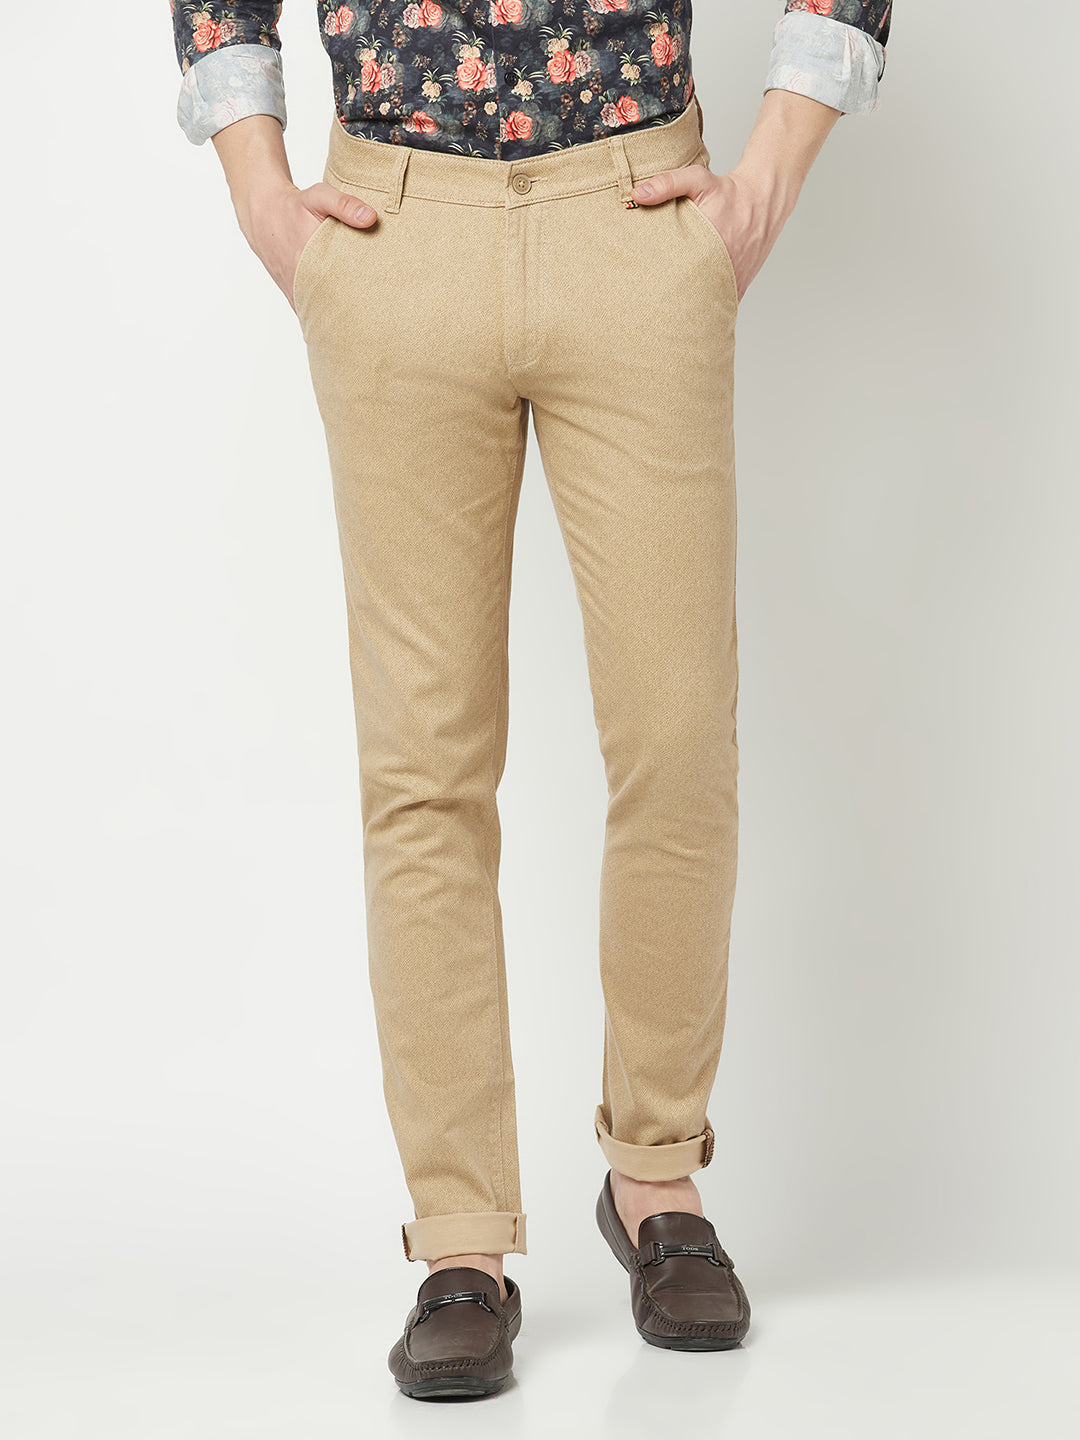  Textured Fawn Chino Trousers